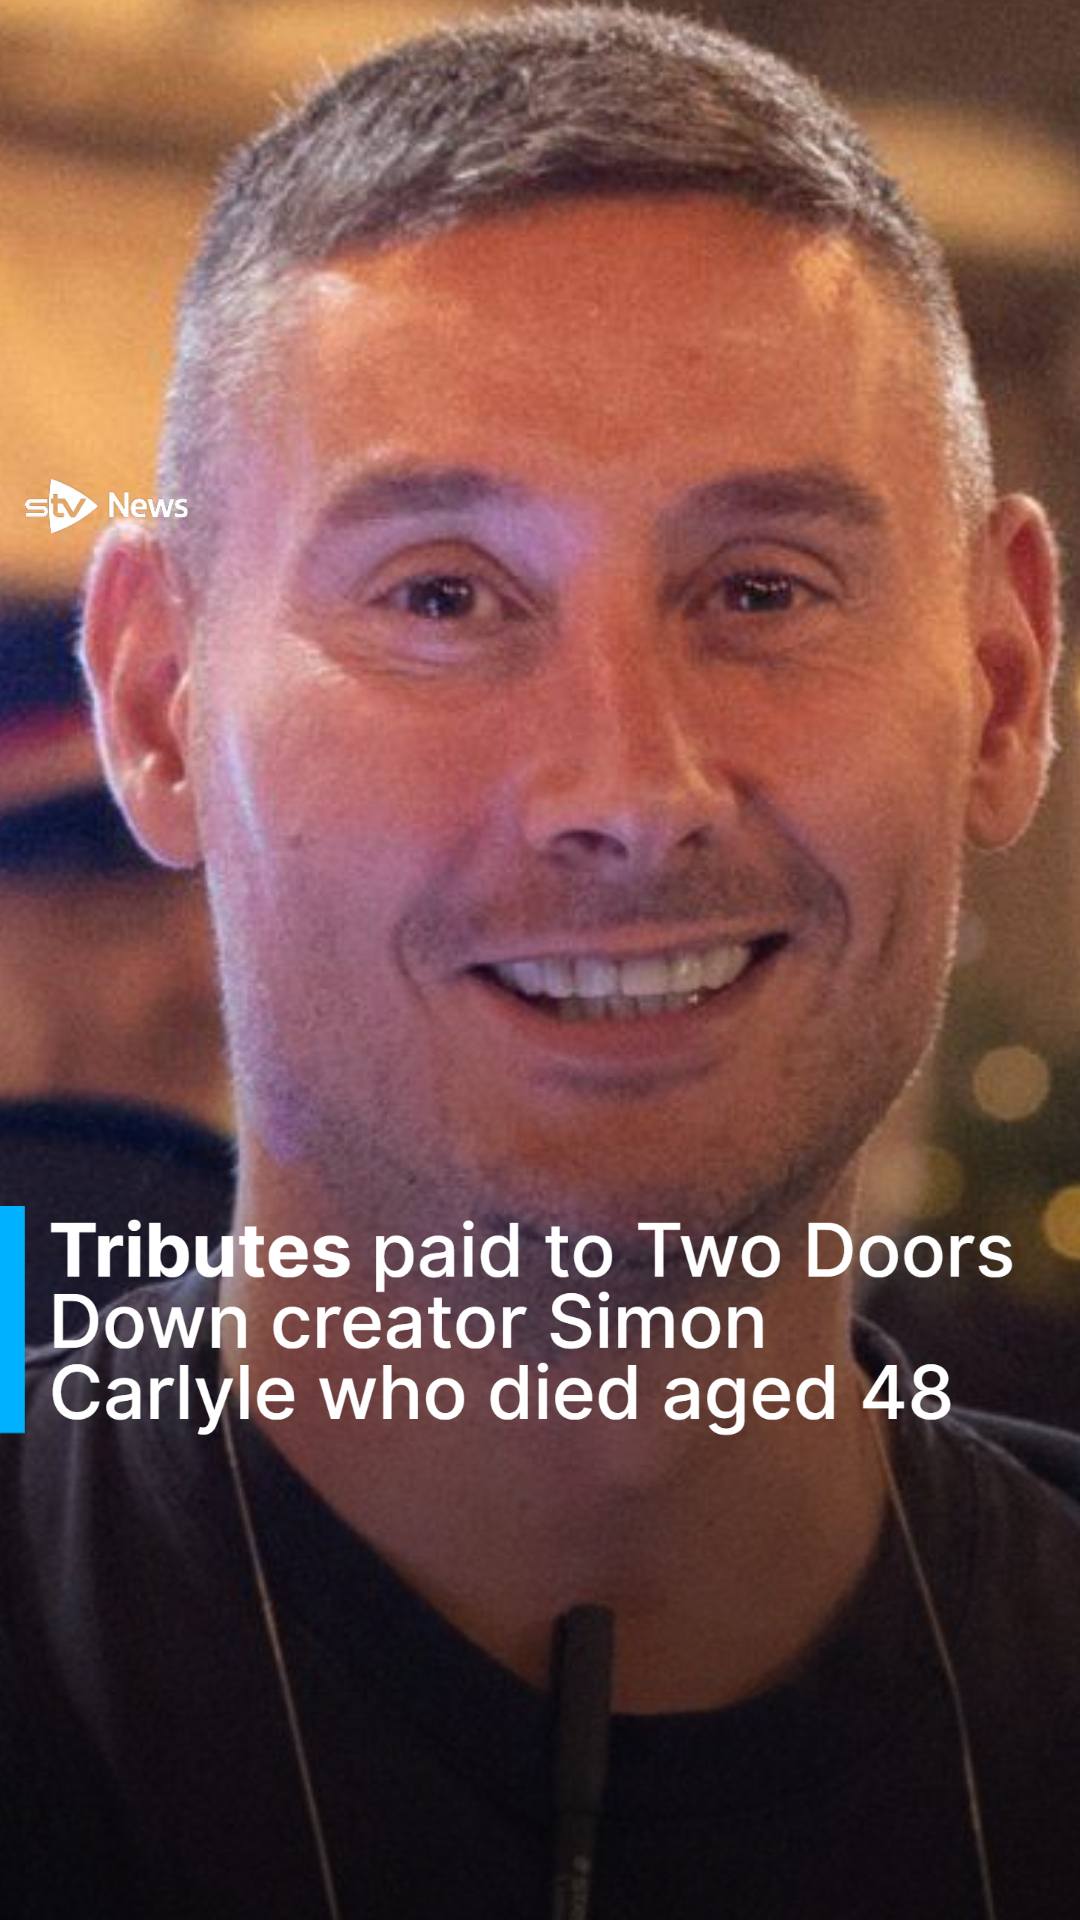 Two Doors Down creator Simon Carlyle dies aged 48